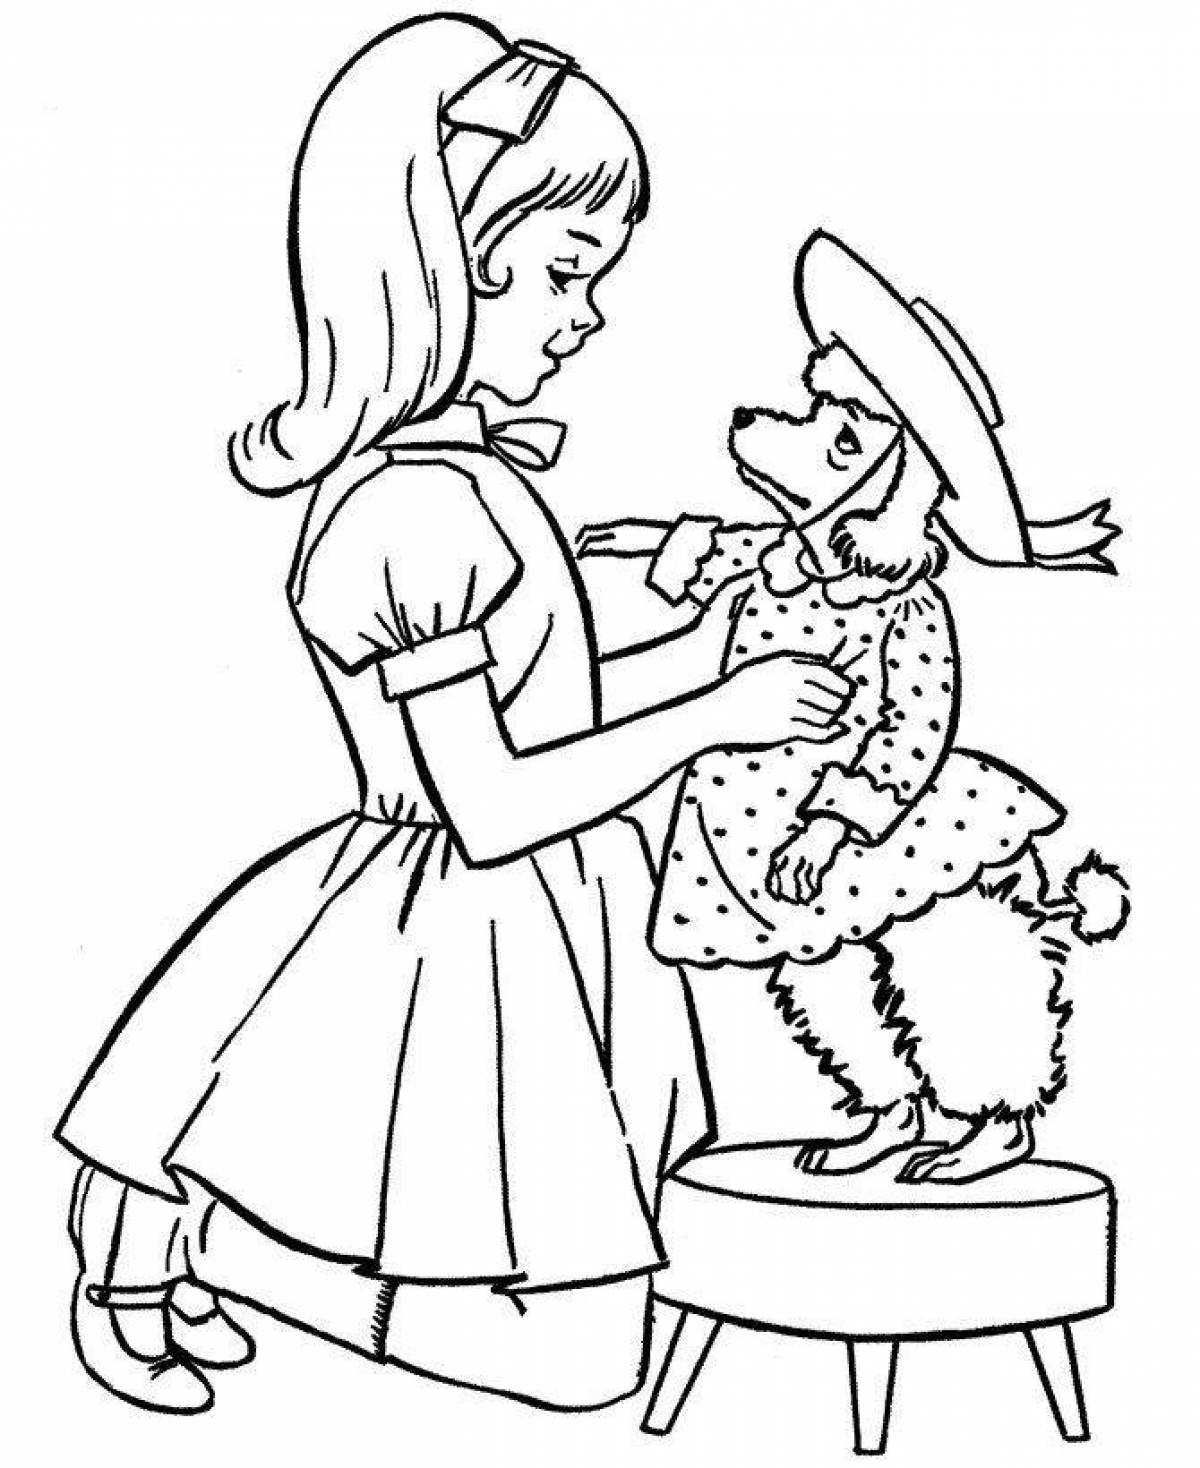 Fun coloring girl with a dog